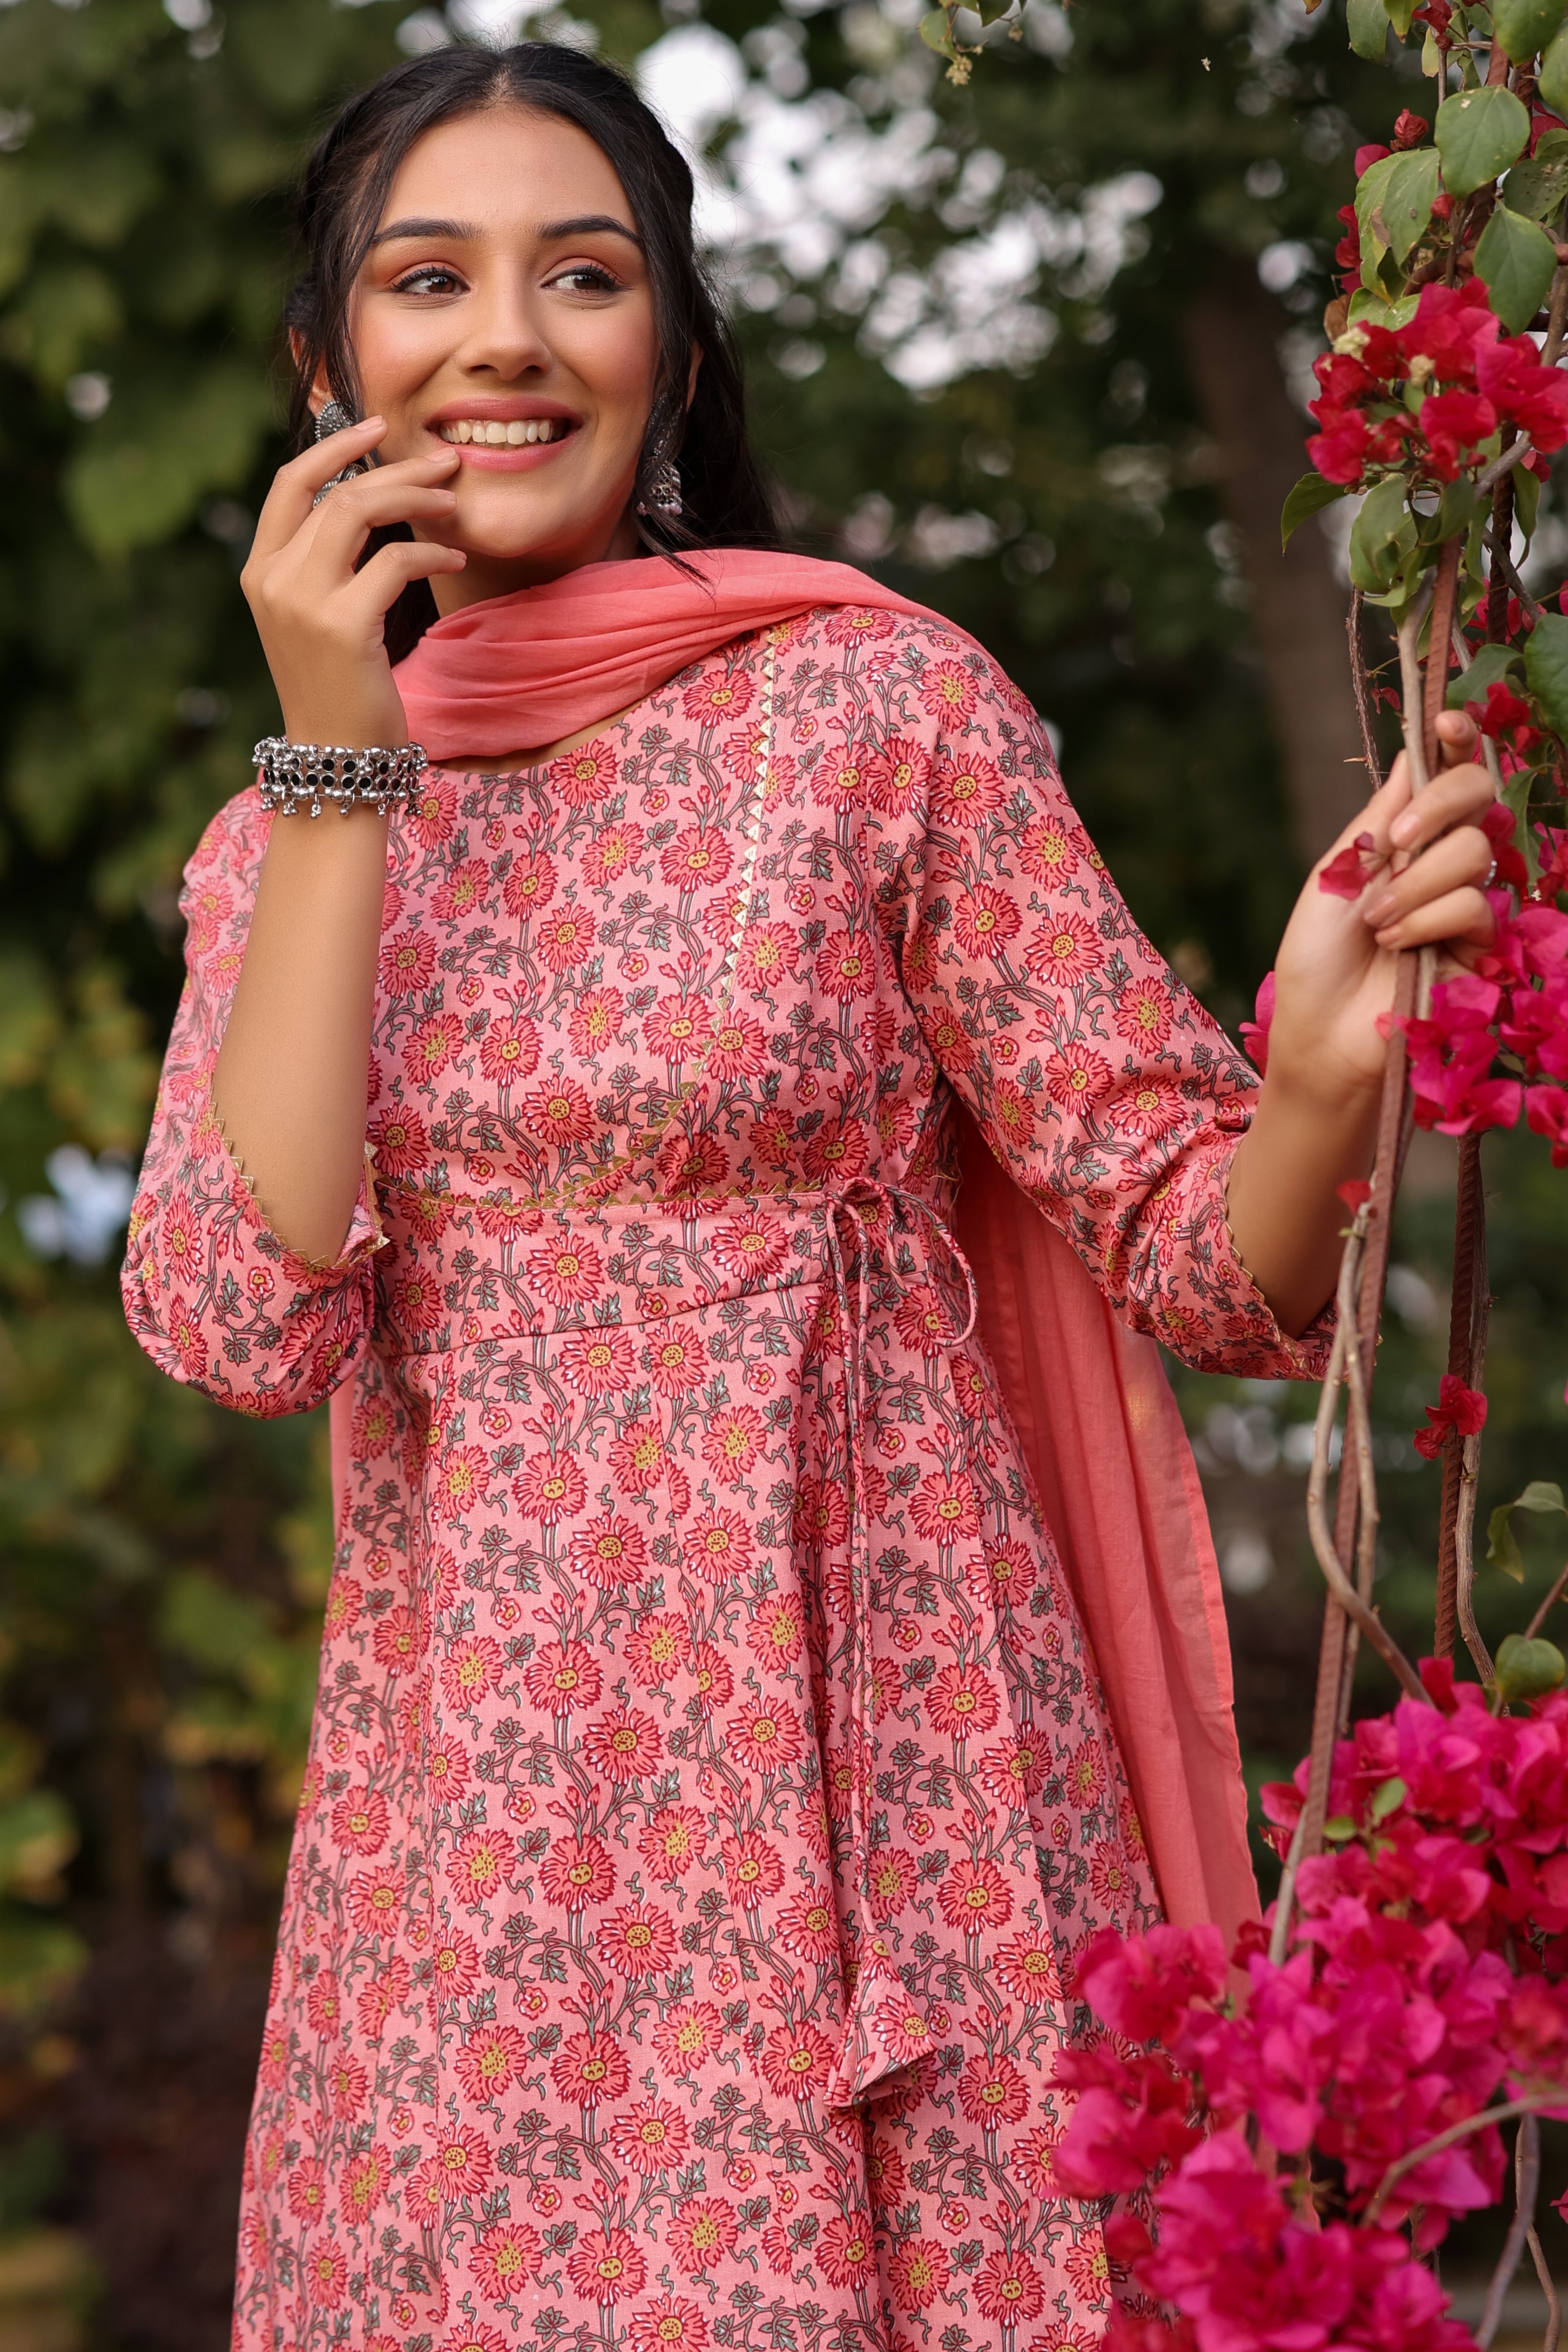 the-set-features-a-floral-printed-anghrakha-style-kurta-a-bottom-with-the-same-print-and-a-solid-dupatta